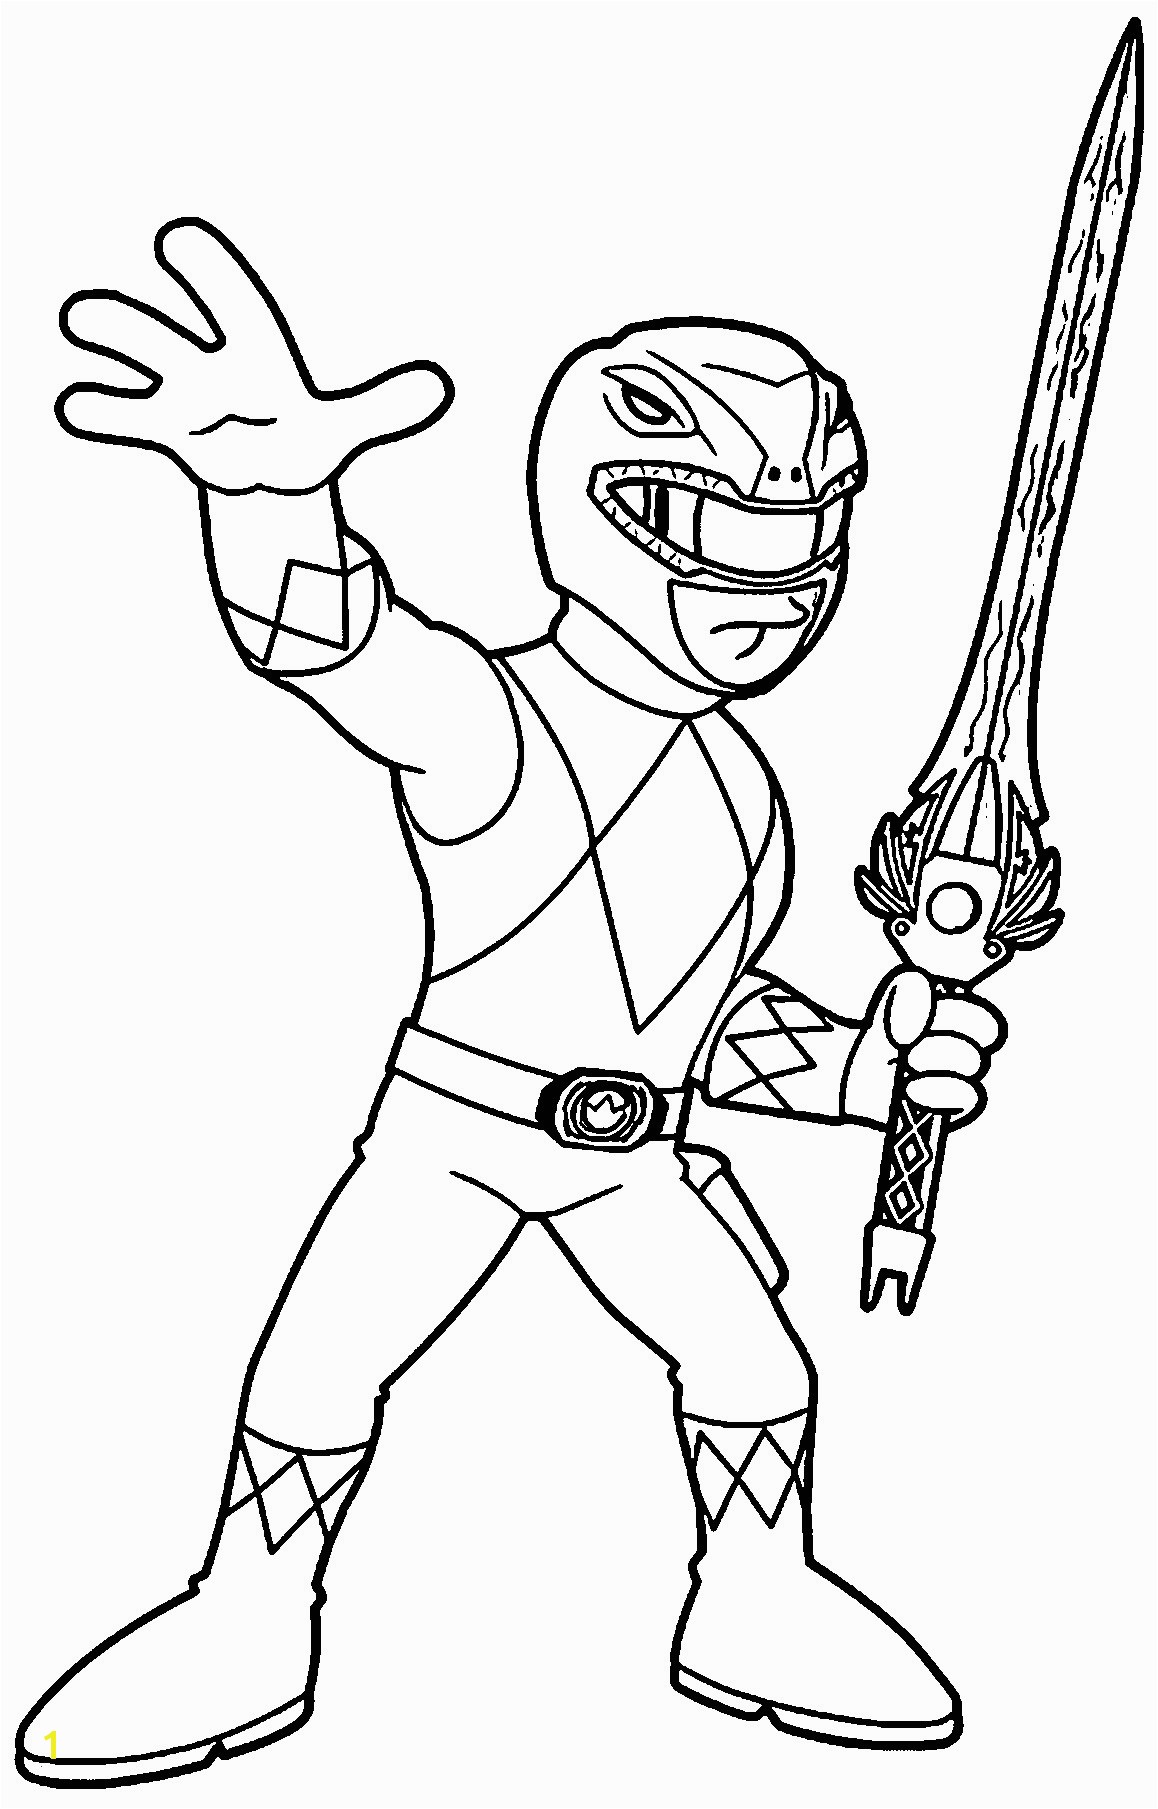 Green Power Ranger Coloring Pages Green Power Ranger Coloring Page Power Ranger Coloring Pages Nice